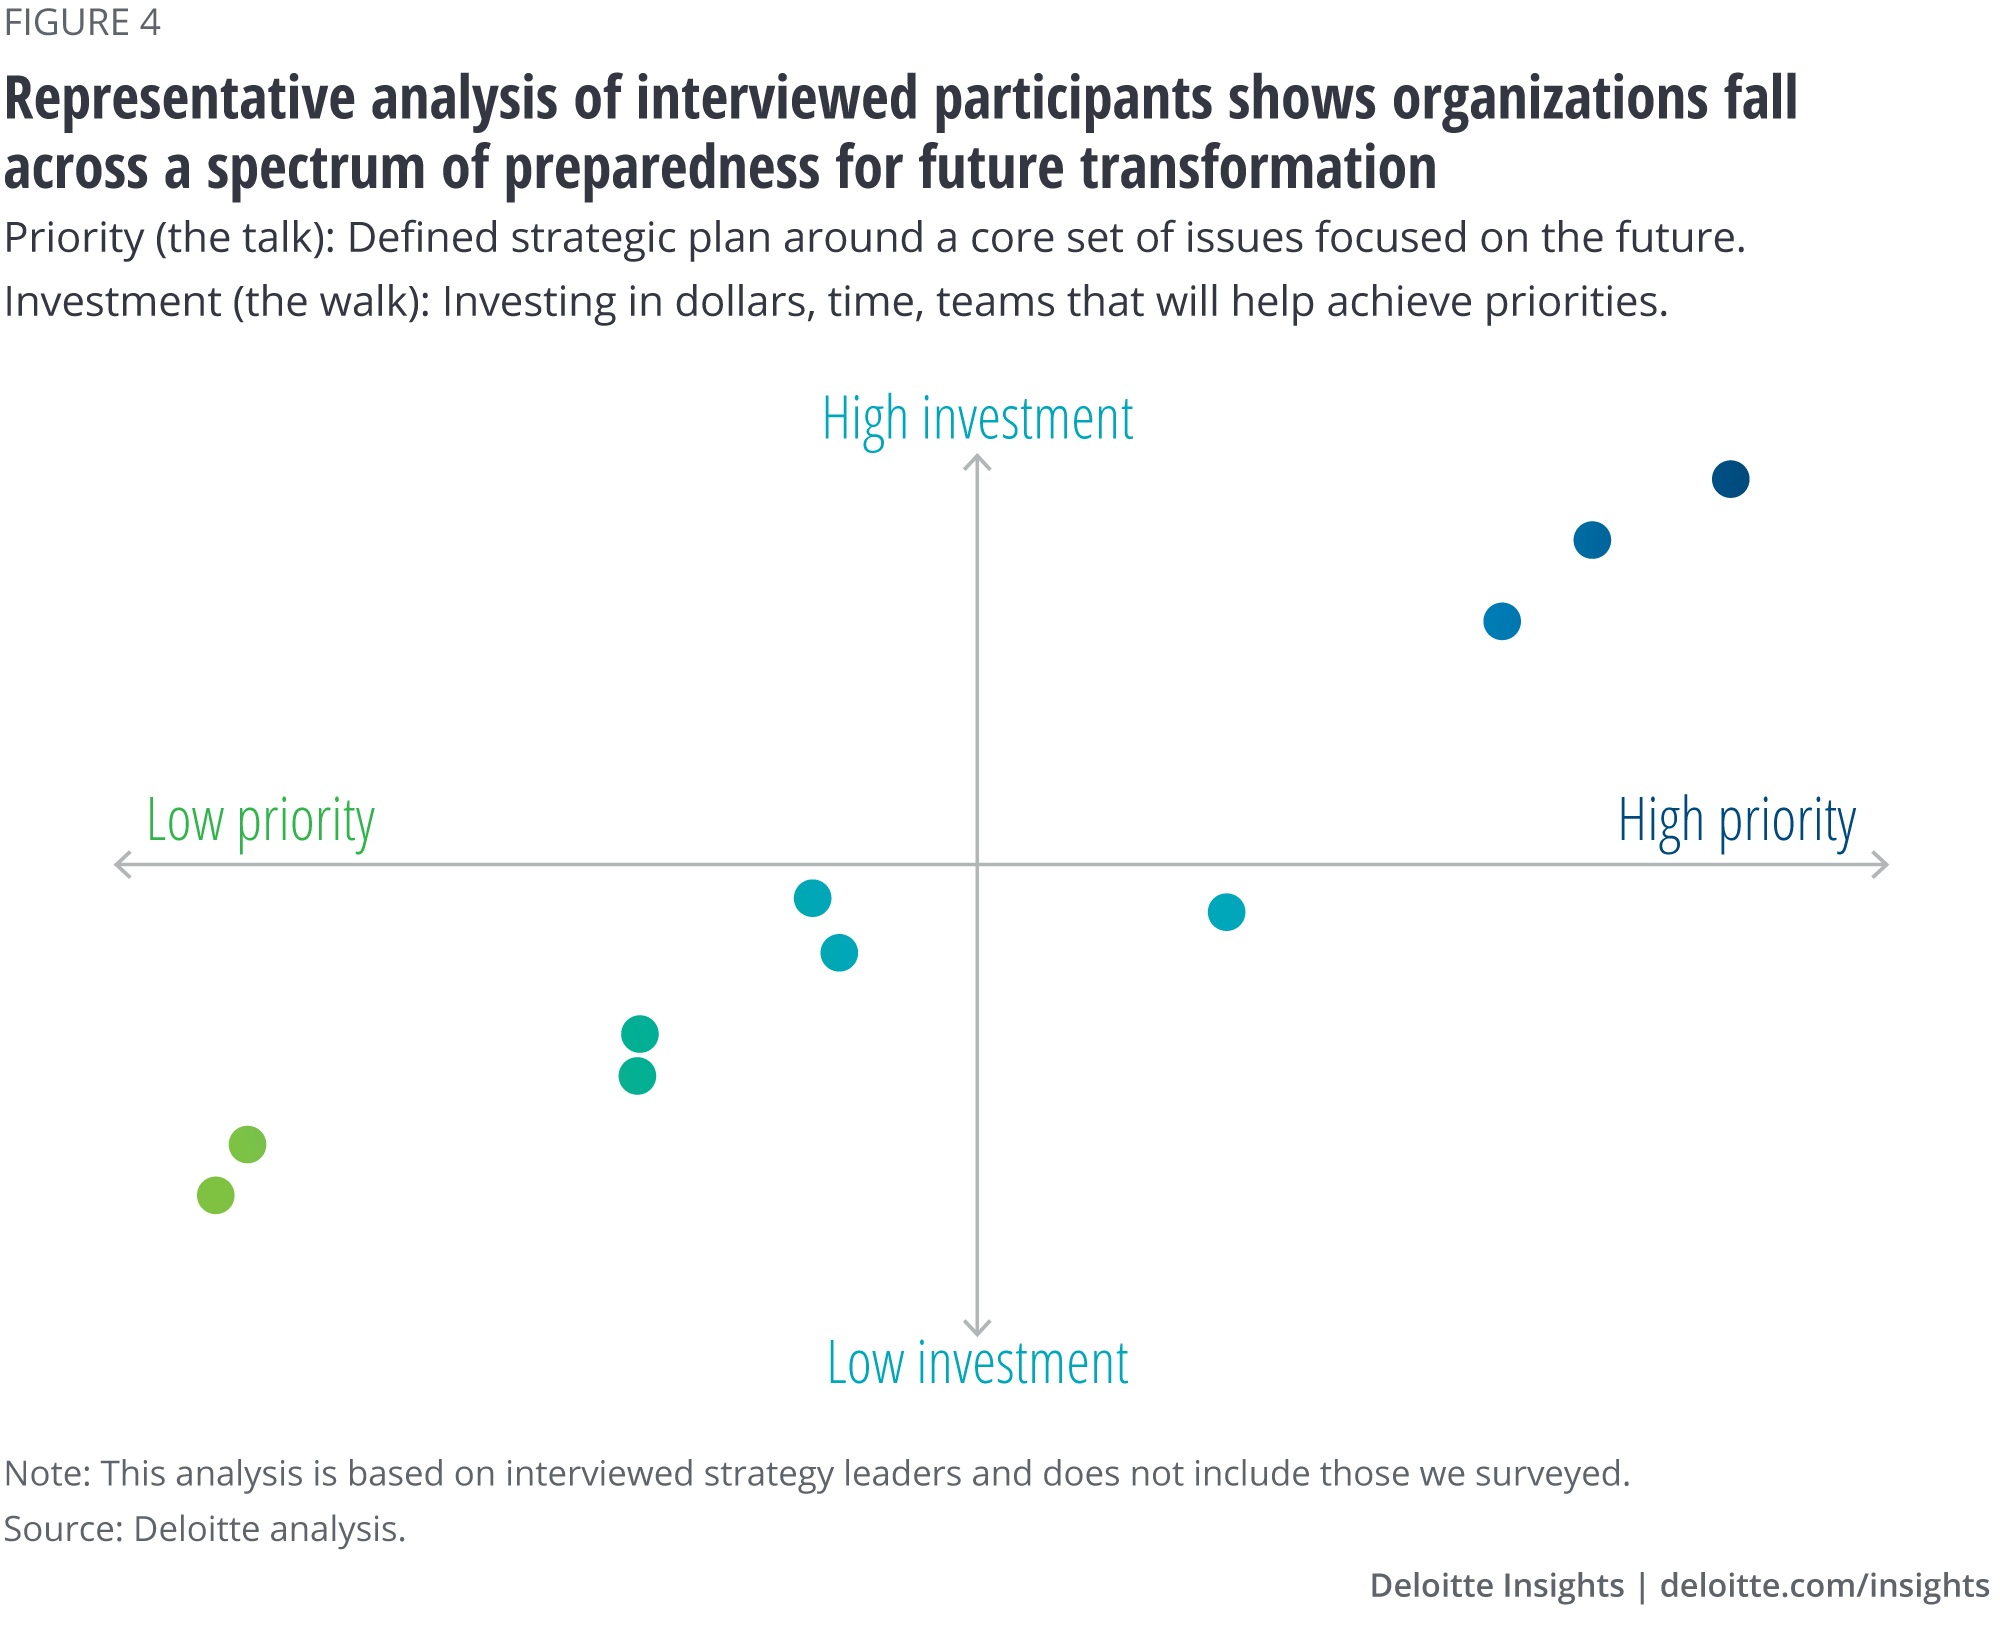 Representative analysis of interviewed participants shows organizations fall across a spectrum of preparedness for future transformation